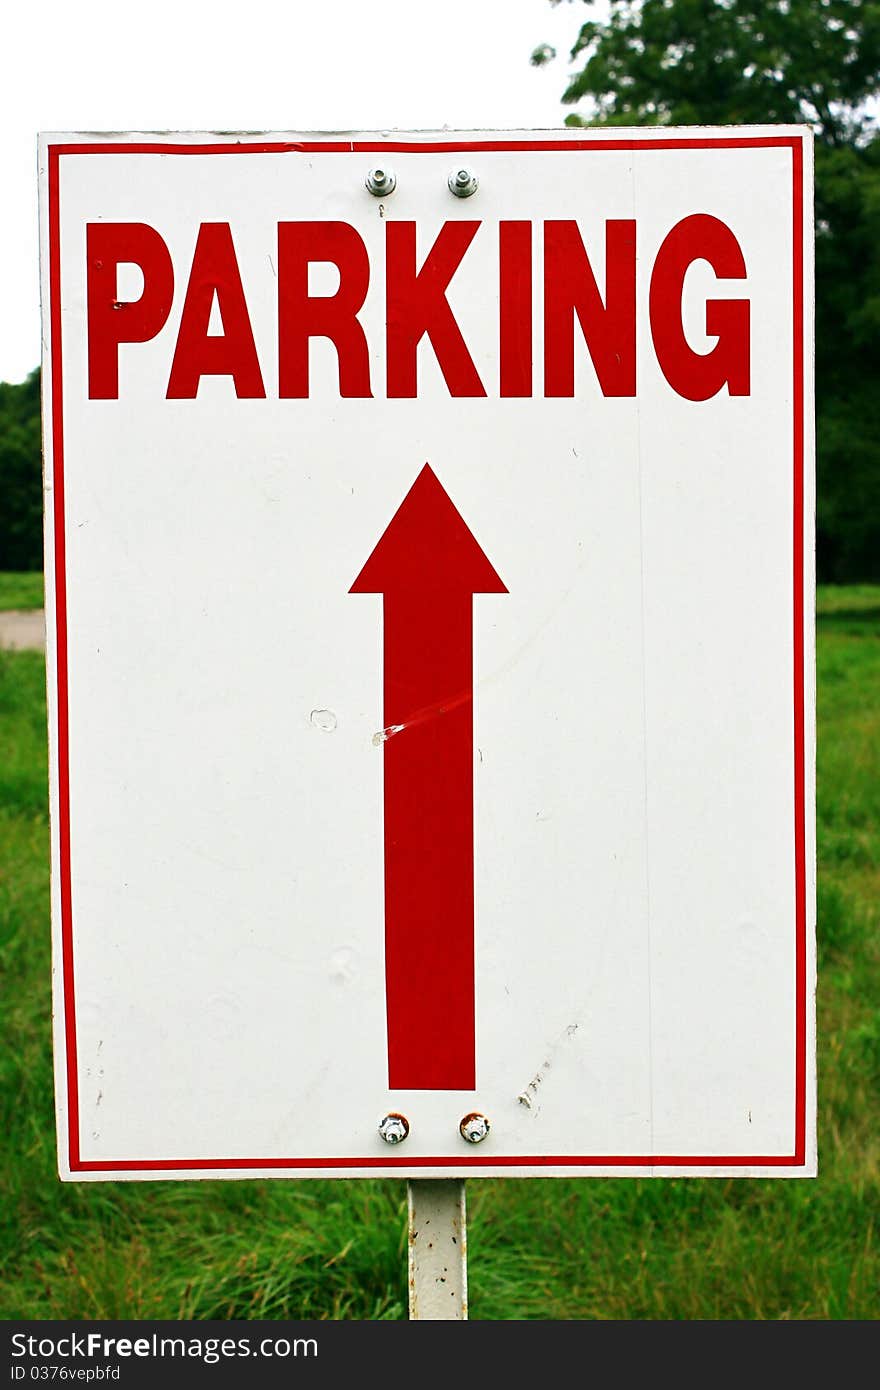 A sign indicating parking ahead